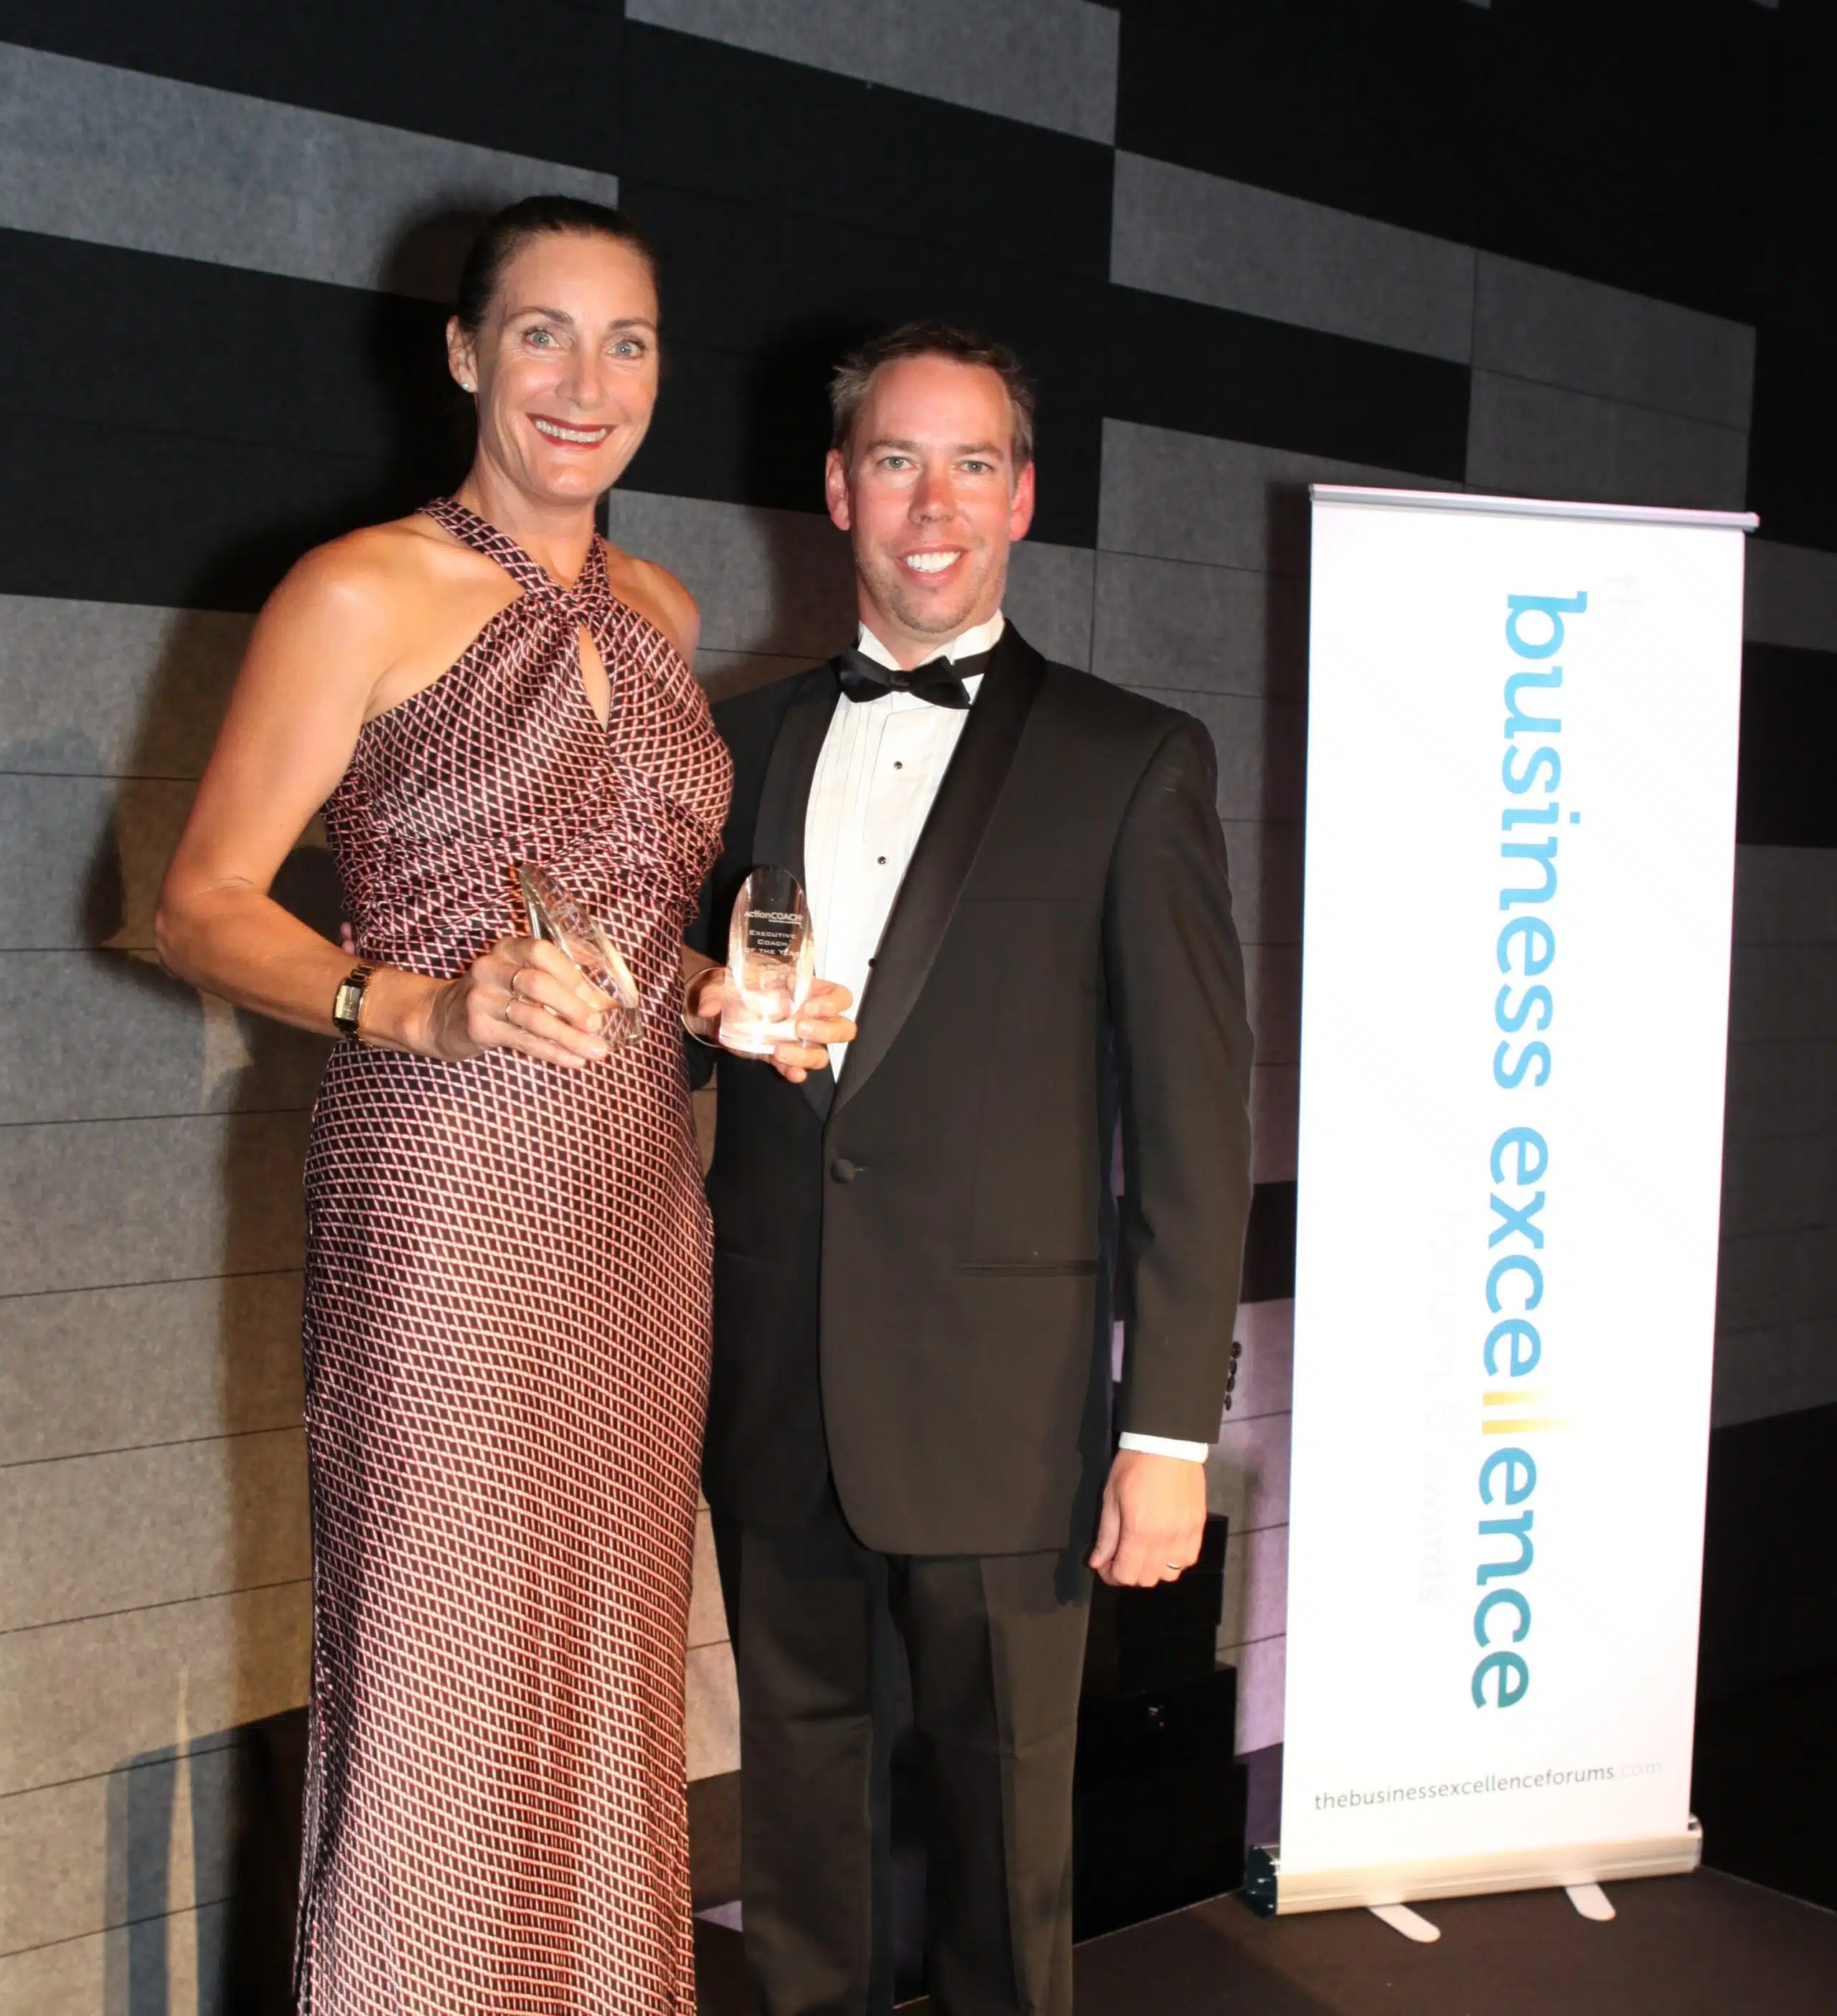 Photo of Suzzanne Laidlaw female business coach winning an excellence award with her Tenfold business coach Ashley Thomson